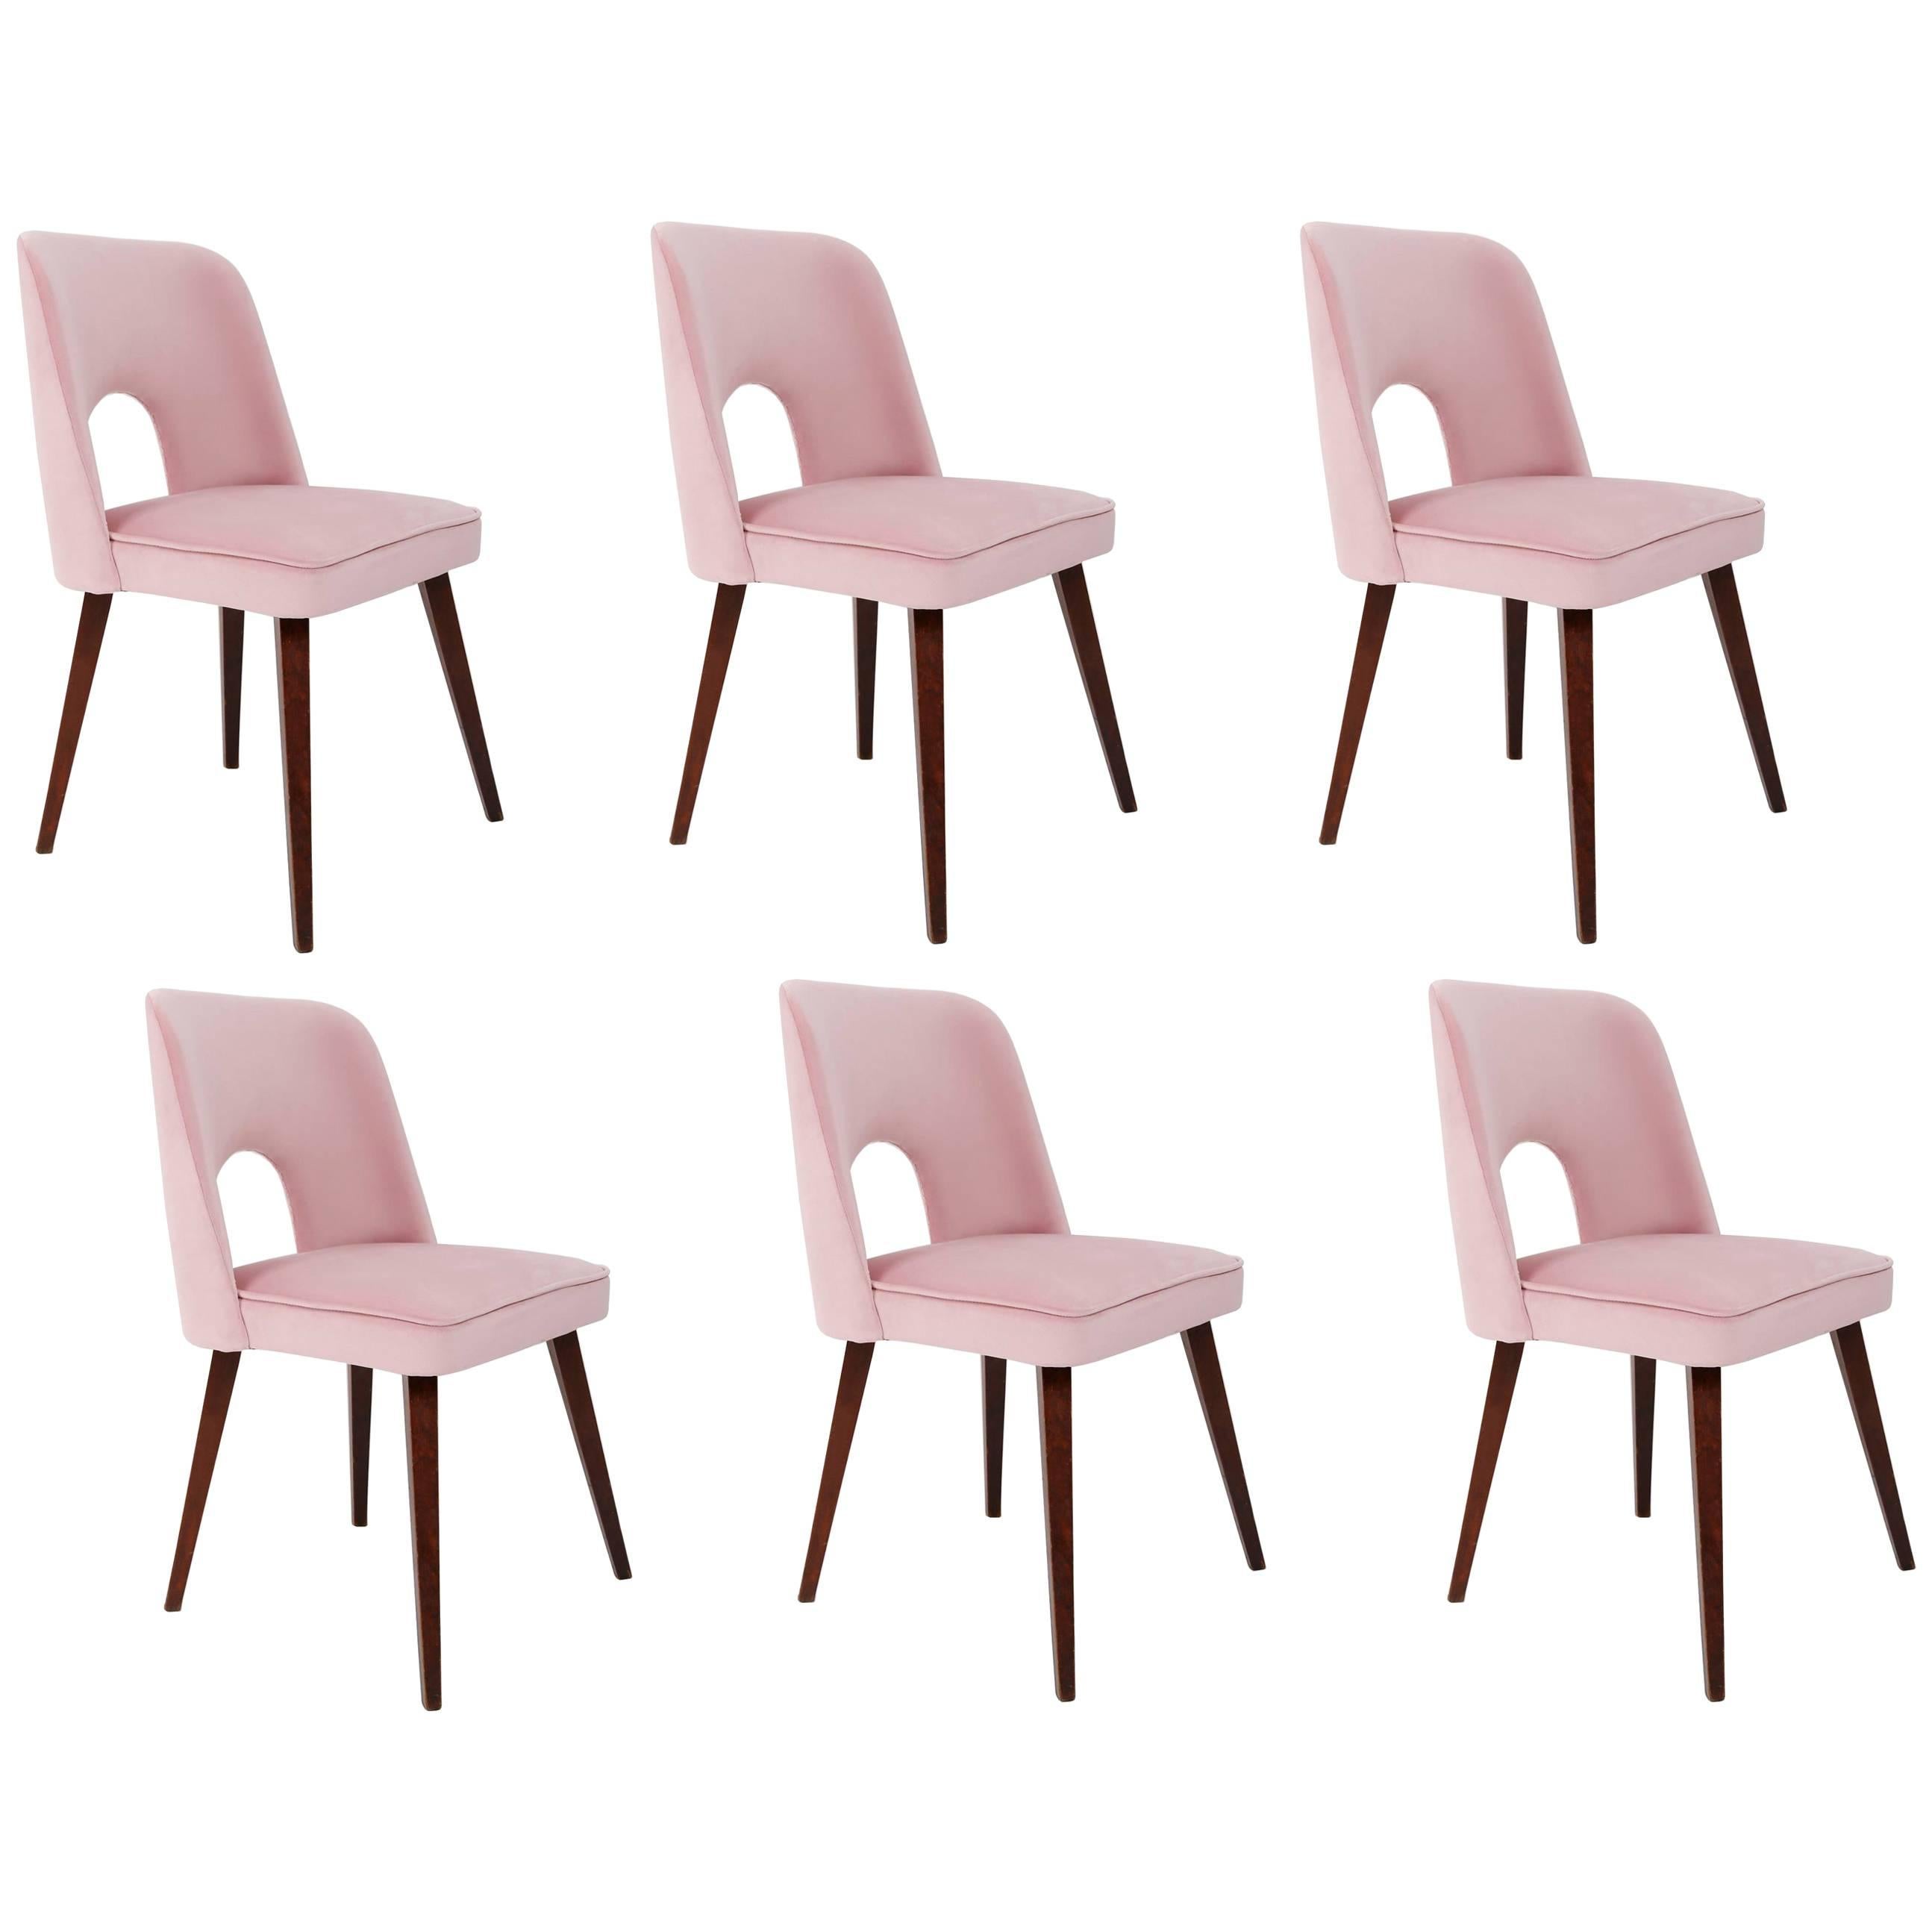 Set of Six Baby Pink "Shell" Chairs, 1960s For Sale